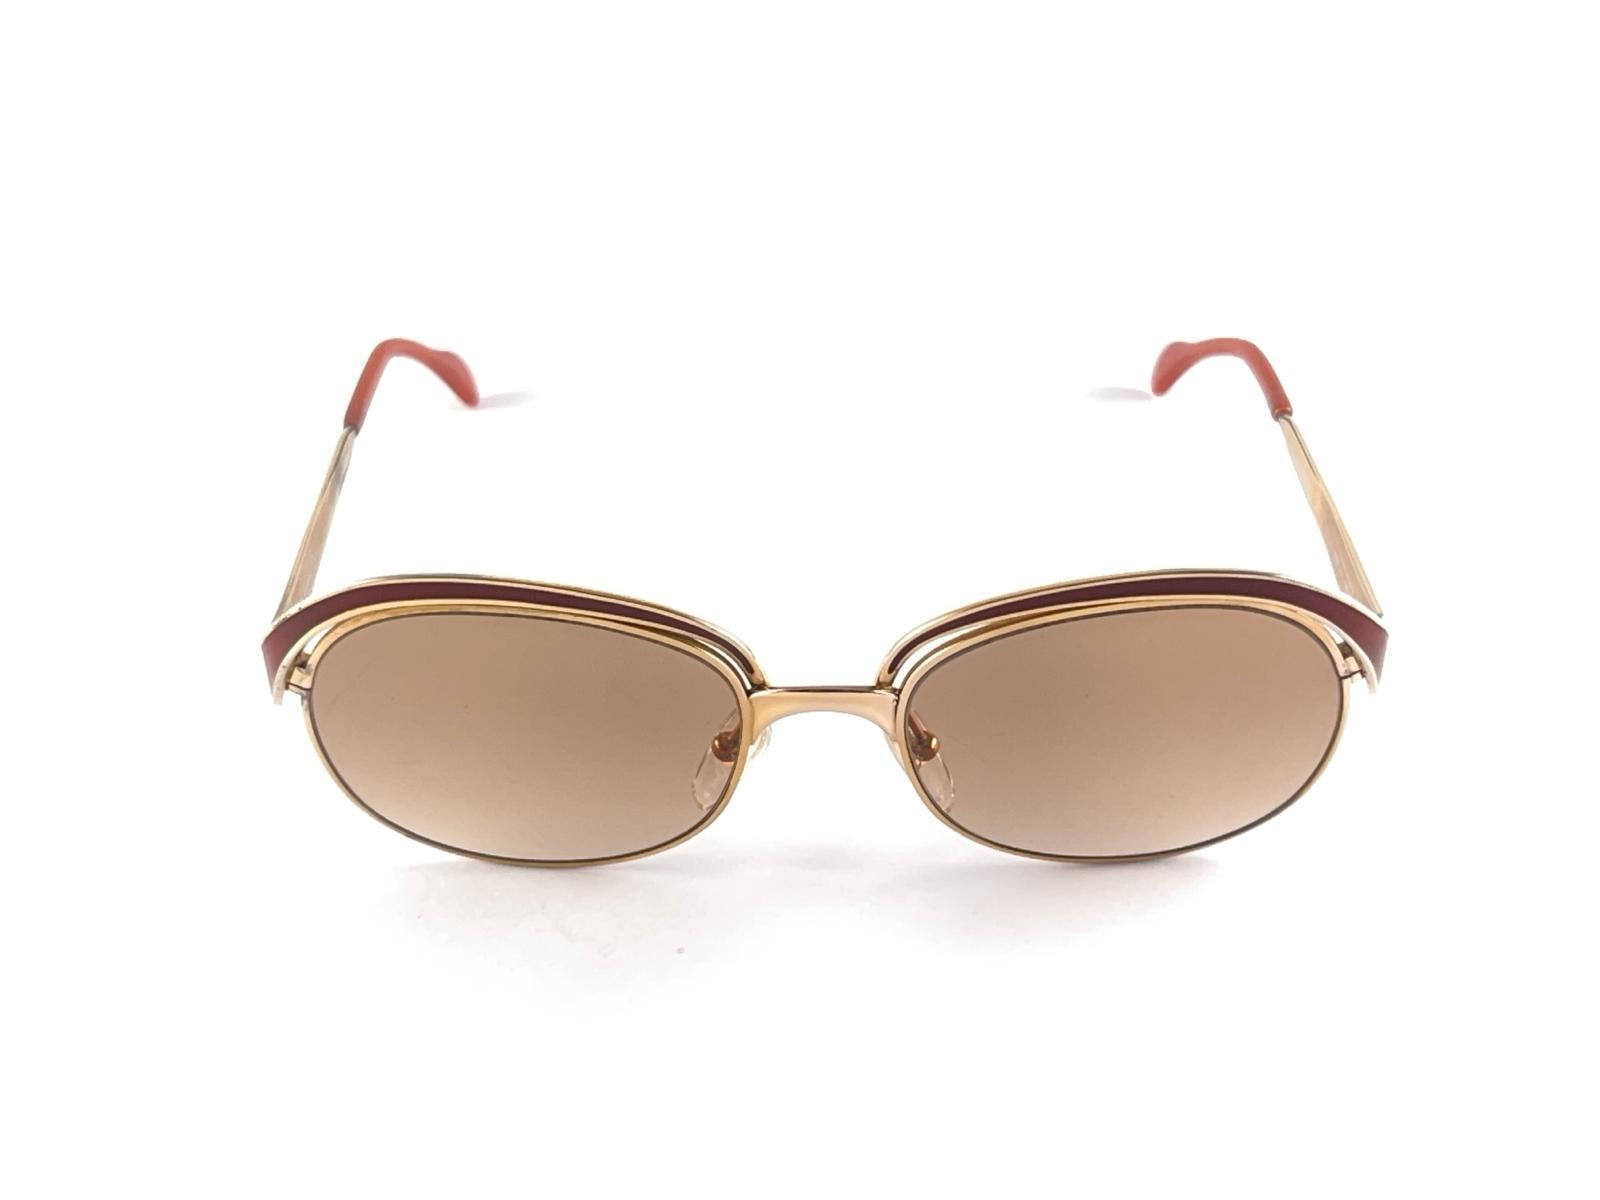 Vintage Christian Dior sunglasses. Enamel Mahogany details over a gold frame.

Spotless medium brown lenses.

This item show minor sign of wear please study the pictures before purchasing


Made in Austria


Front                                    